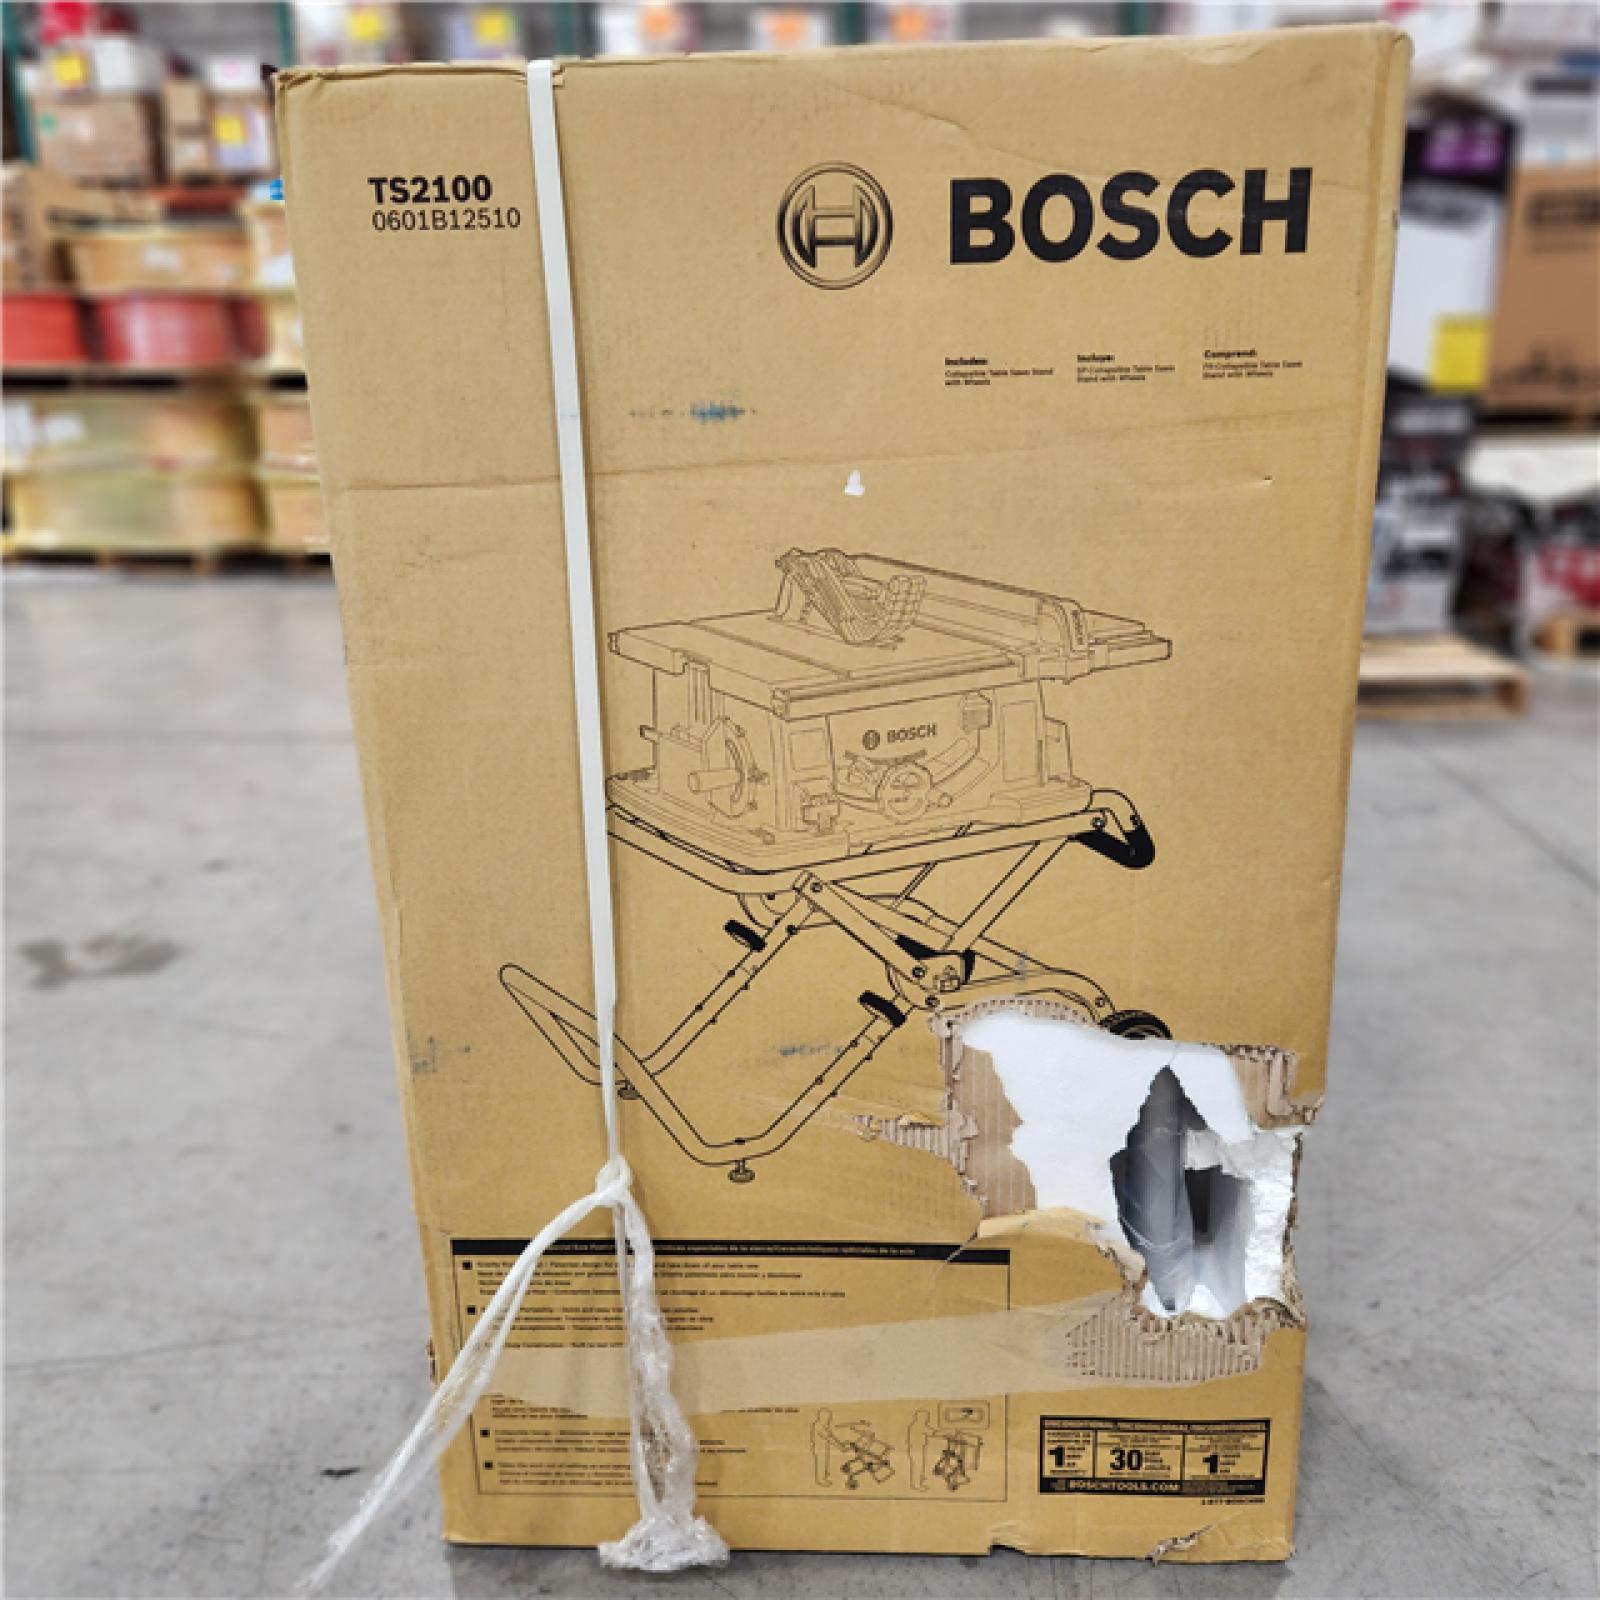 DALLAS LOCATIN NEW!; Bosch Portable Folding Gravity Rise Table Saw Stand with Wheels